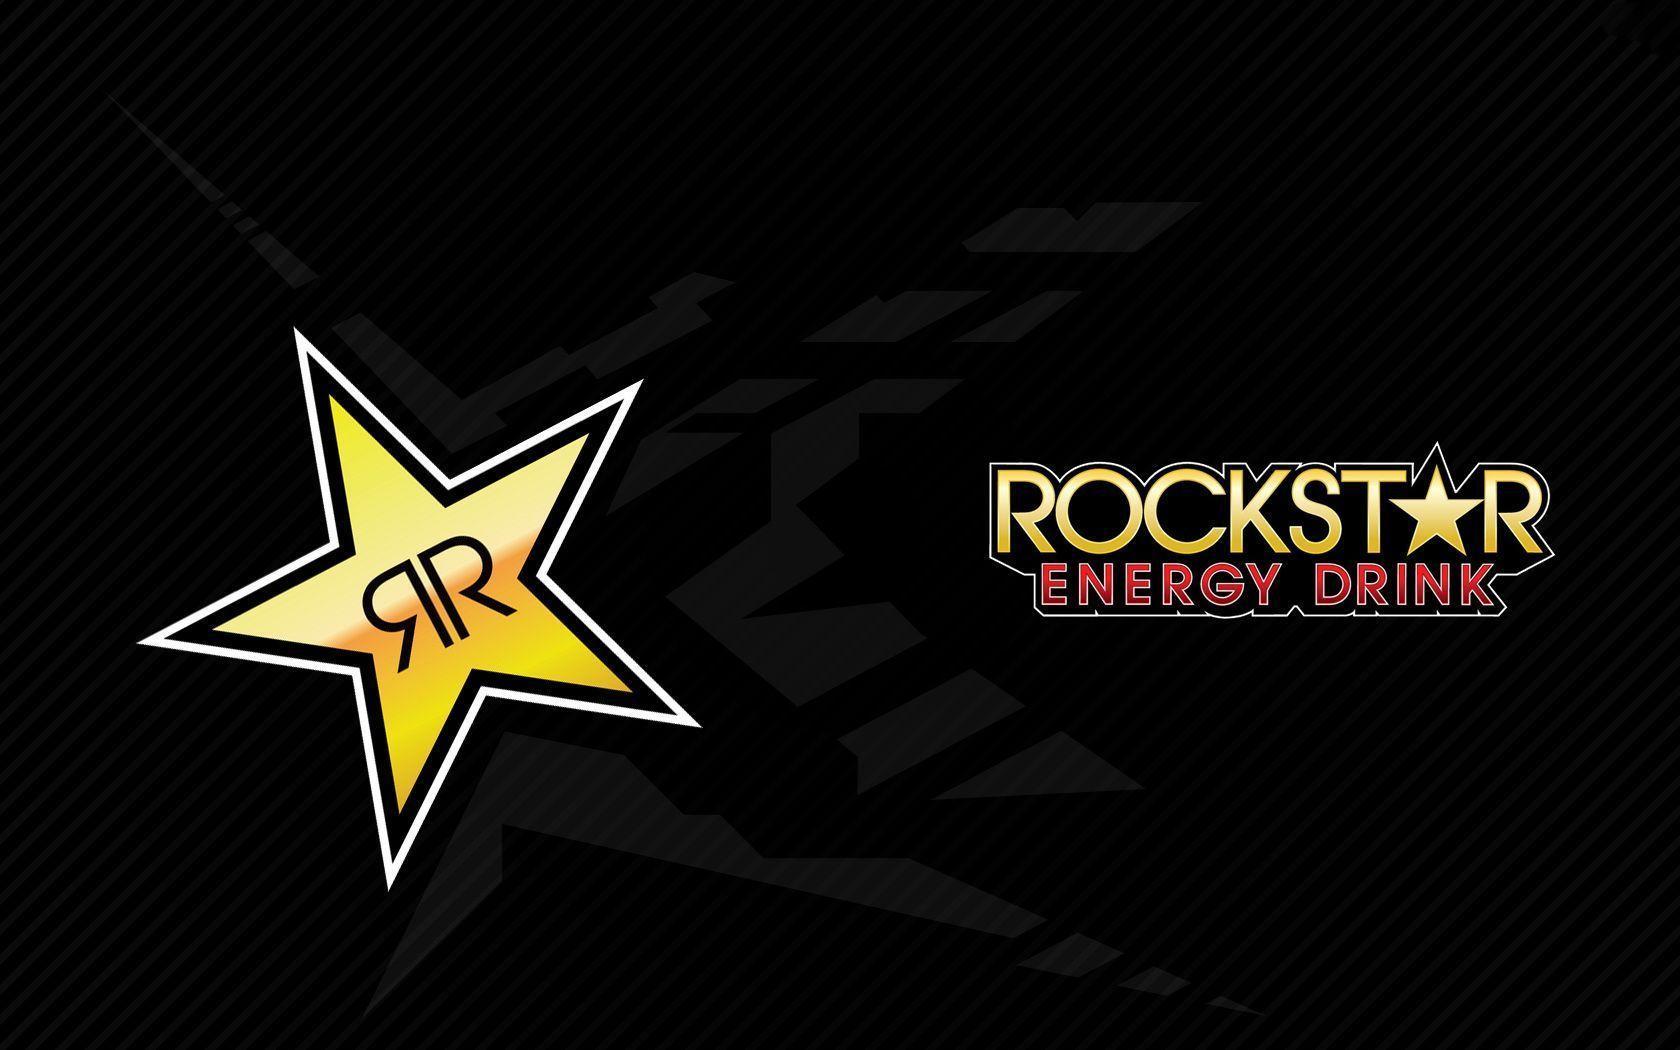 RockStar wallpaper and image, picture, photo